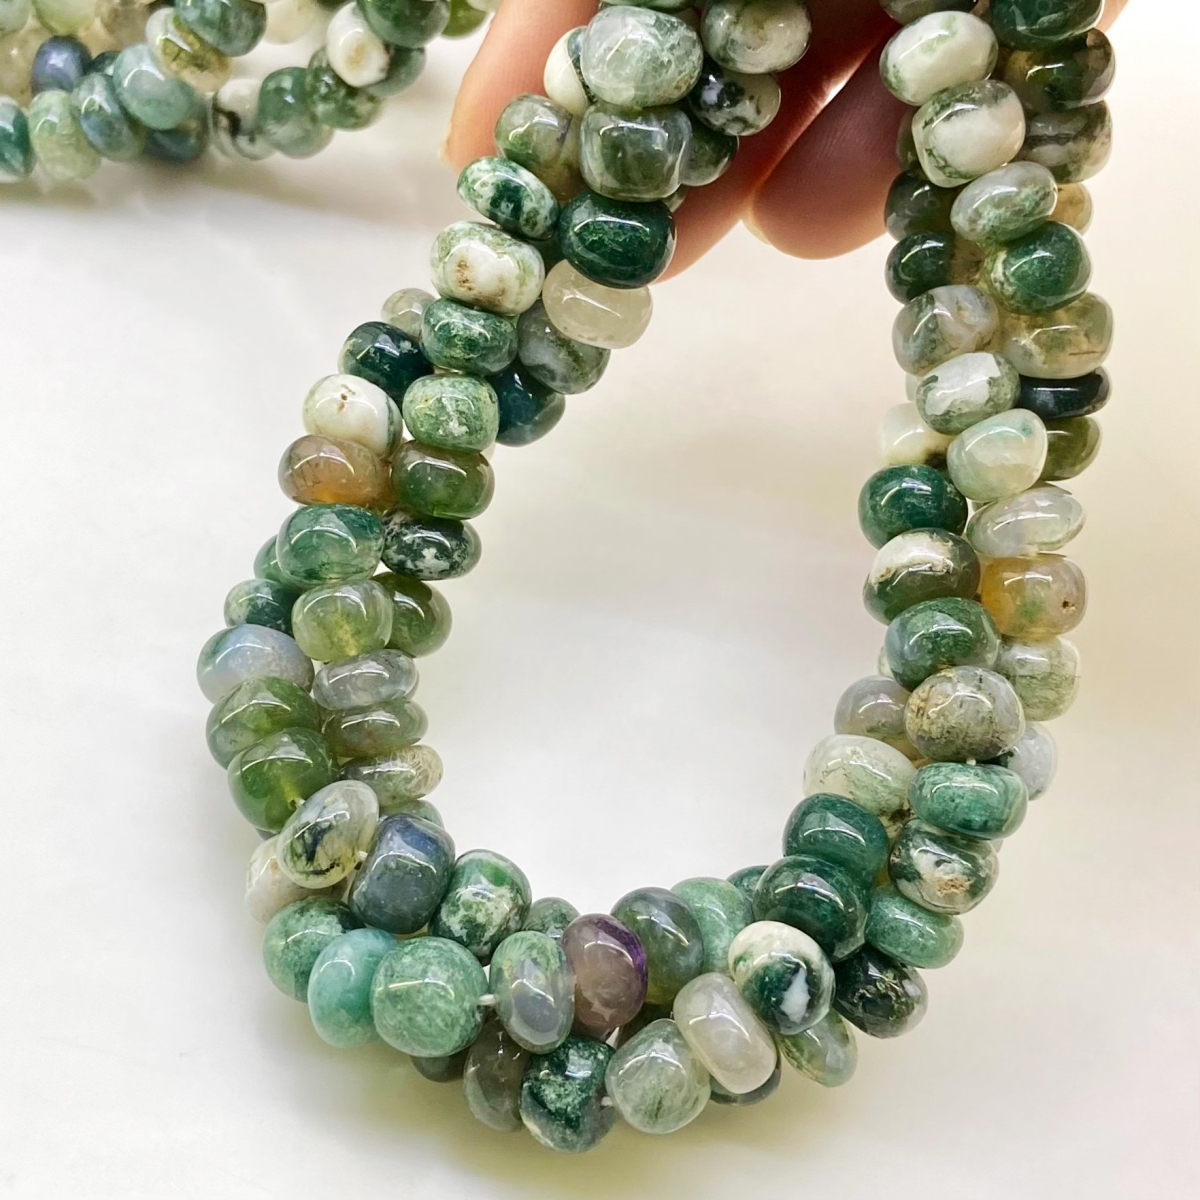 Tree Agate 7-8mm Faceted Cube AA Grade Gemstone Beads Lot - 156245